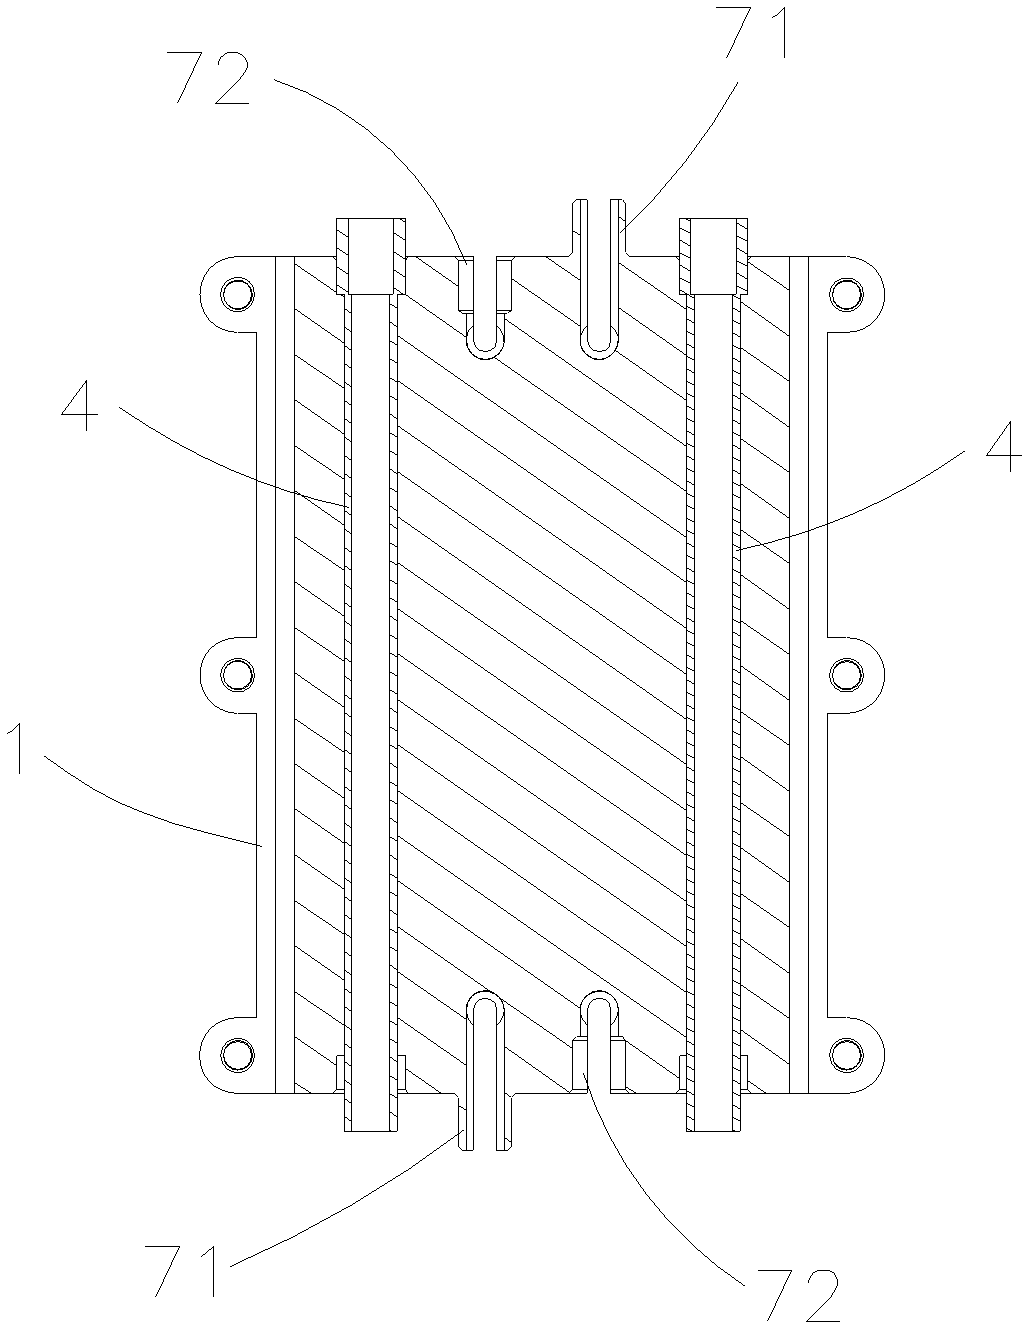 Explosion-proof LED (light emitting diode) lighting module and combination thereof